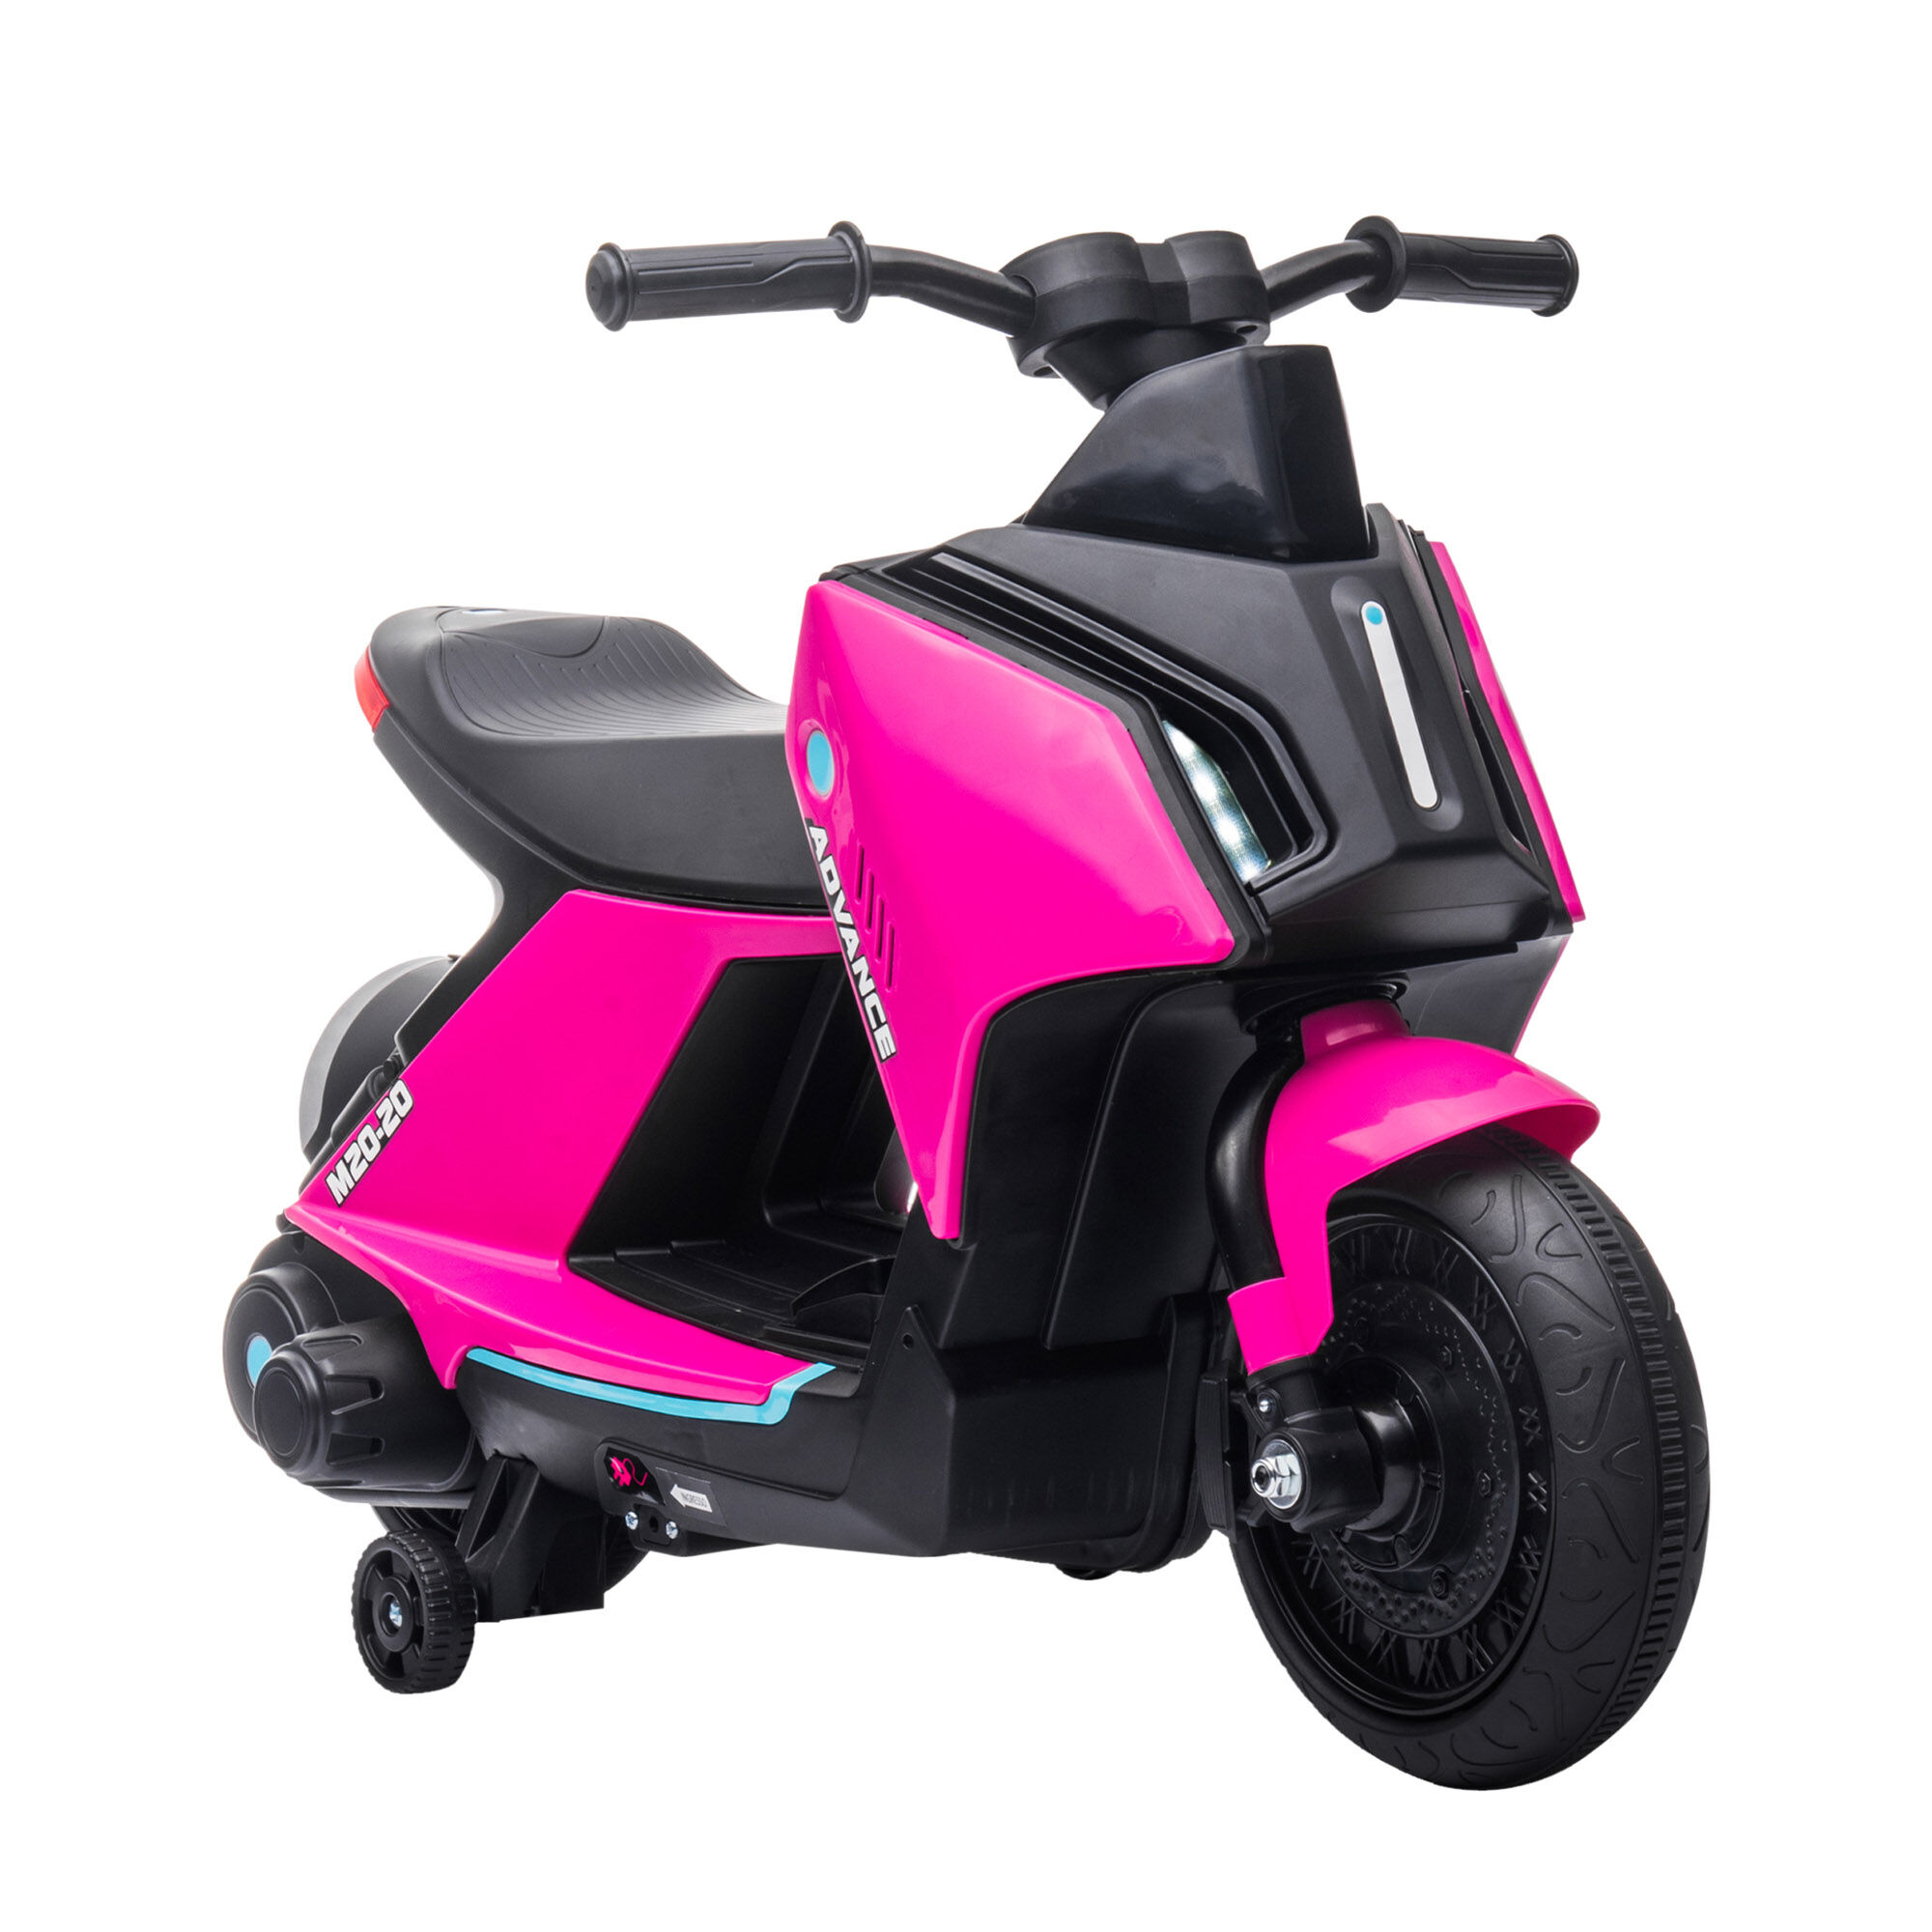 Aosom Electric Motorcycle for Kids 6V Battery-Powered Dirt Bike Ride-On Toy with Music and Headlights Pink   Aosom.com